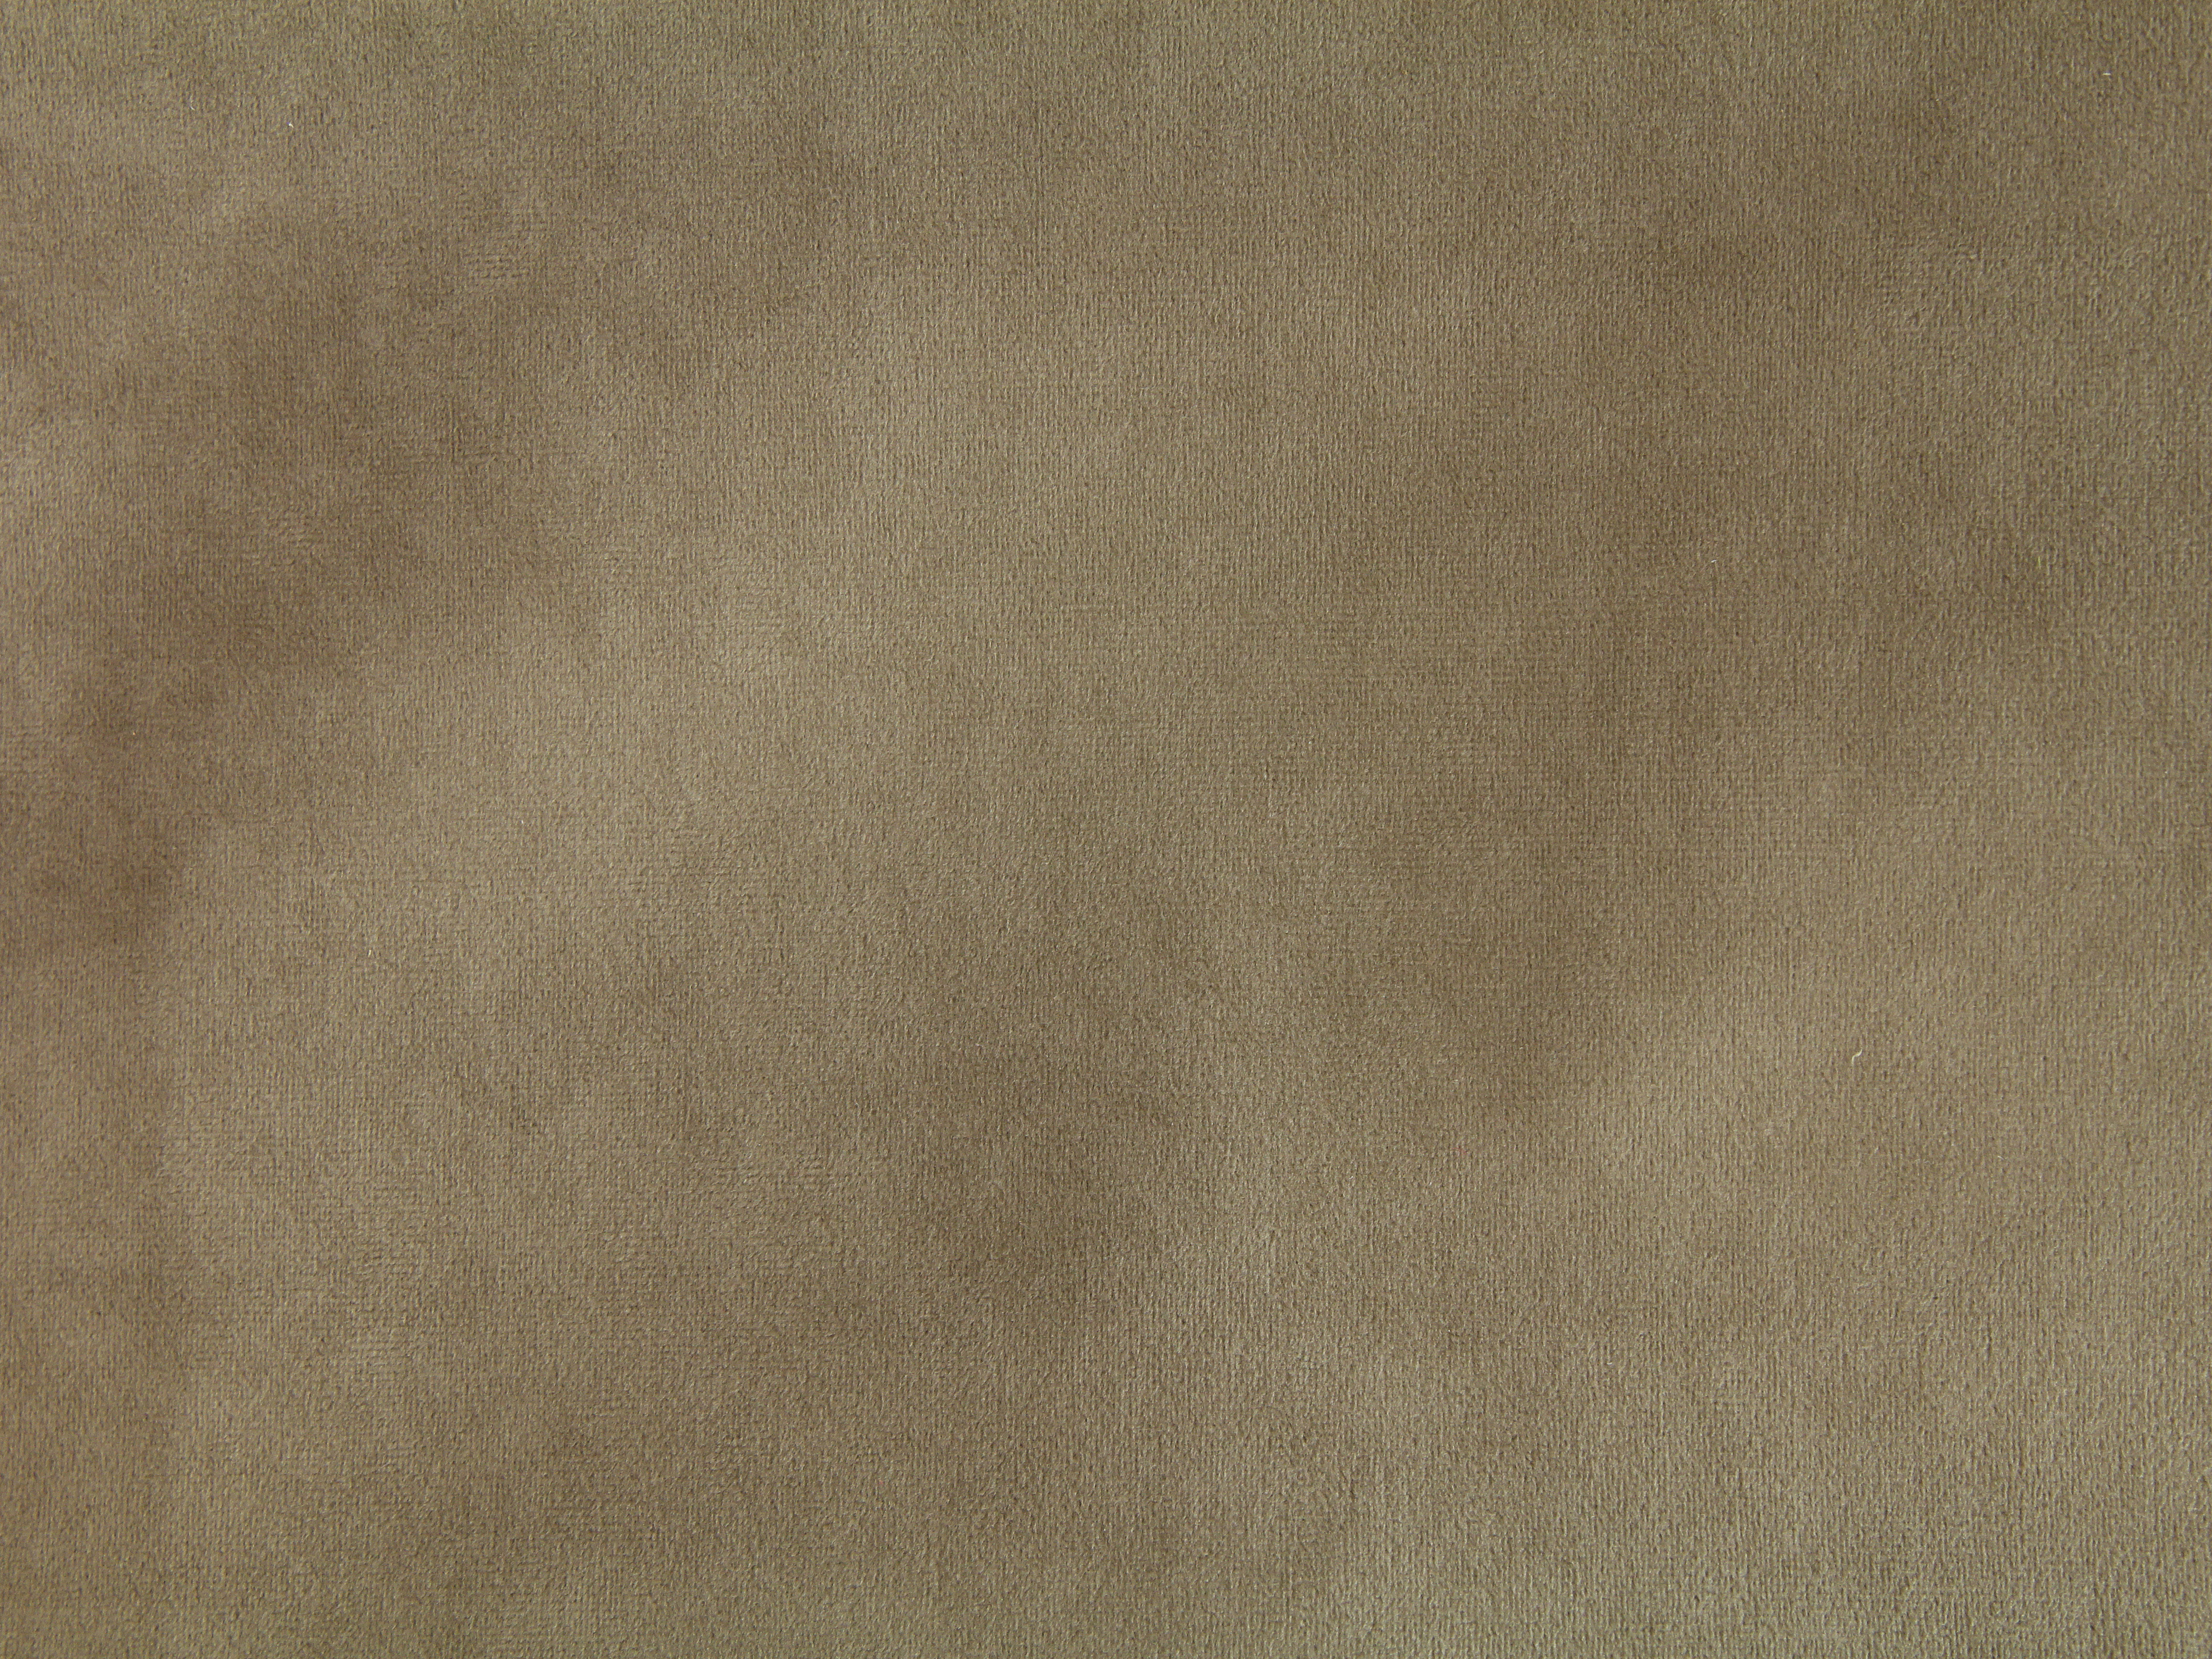 brown fabric fuzzy texture photo soft cloth stock image wallpaper